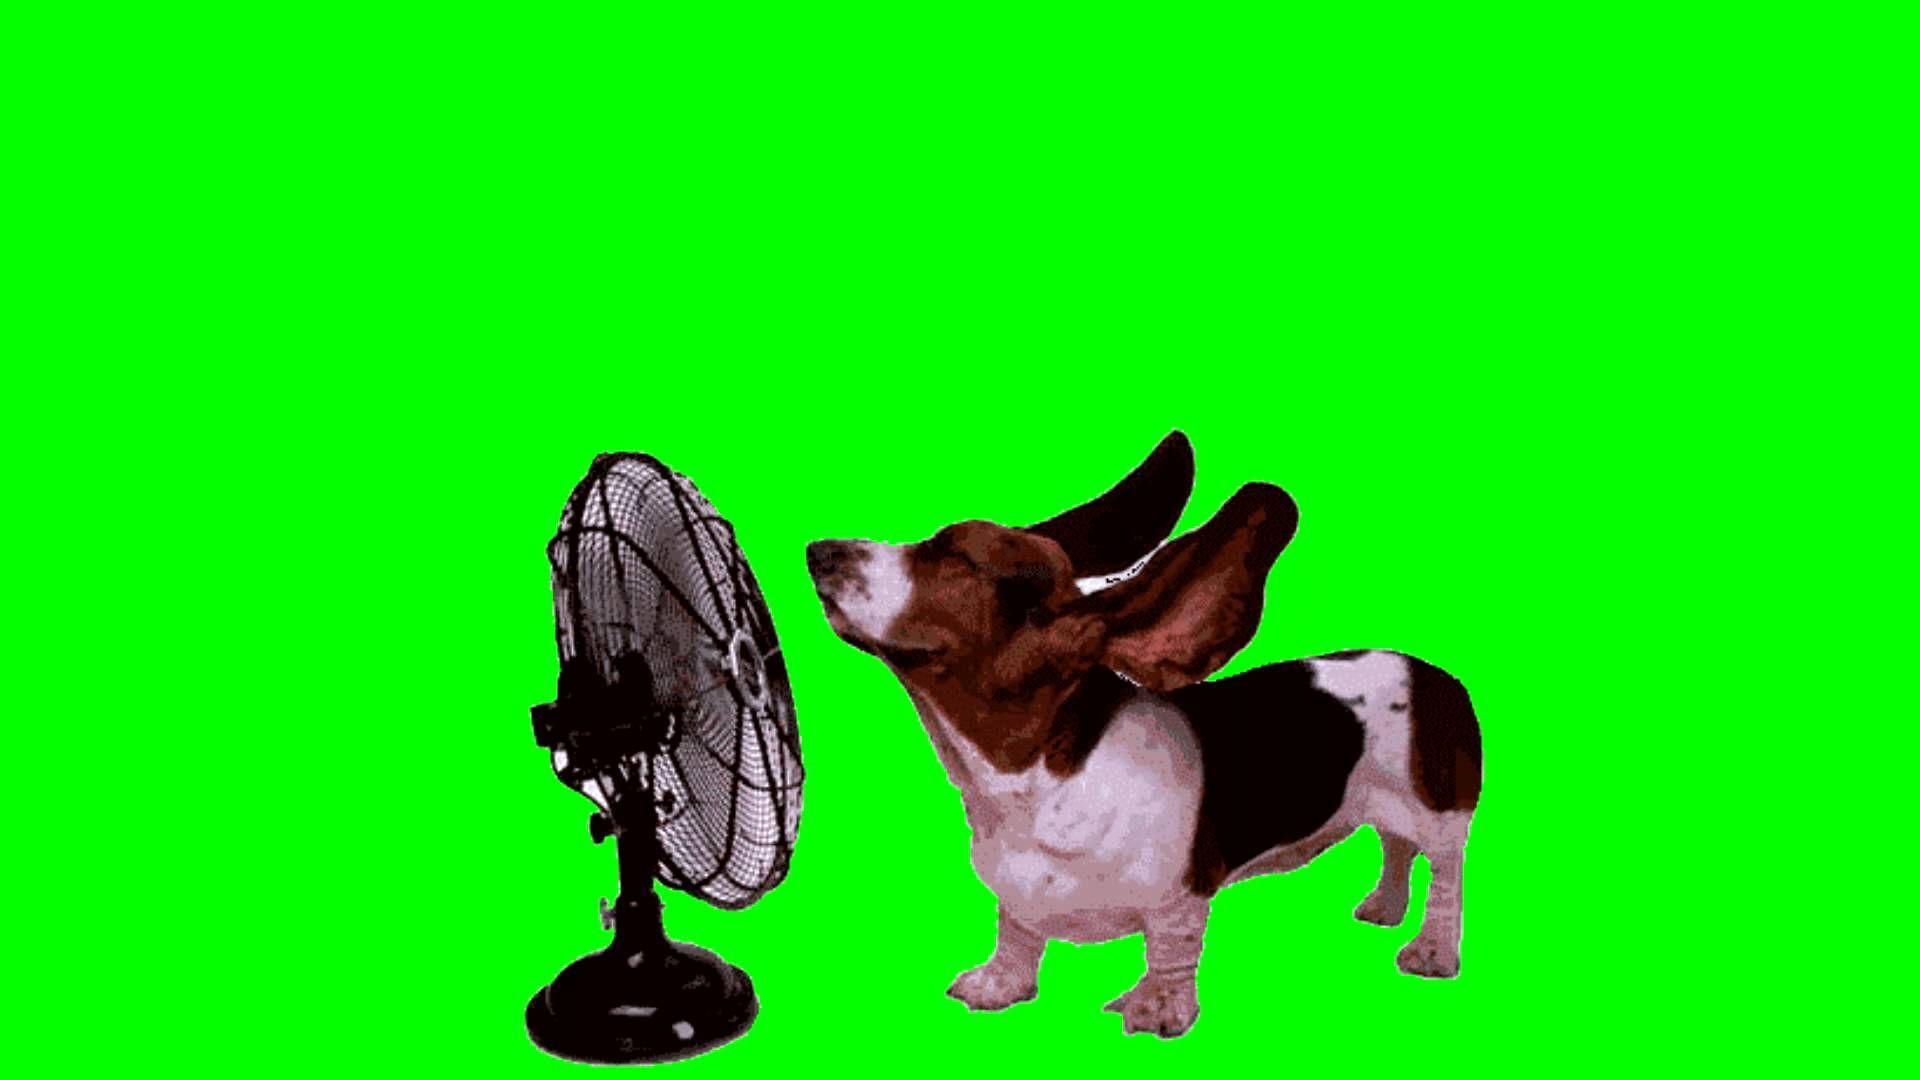 Footage HD DOG free download animation on a green screen background